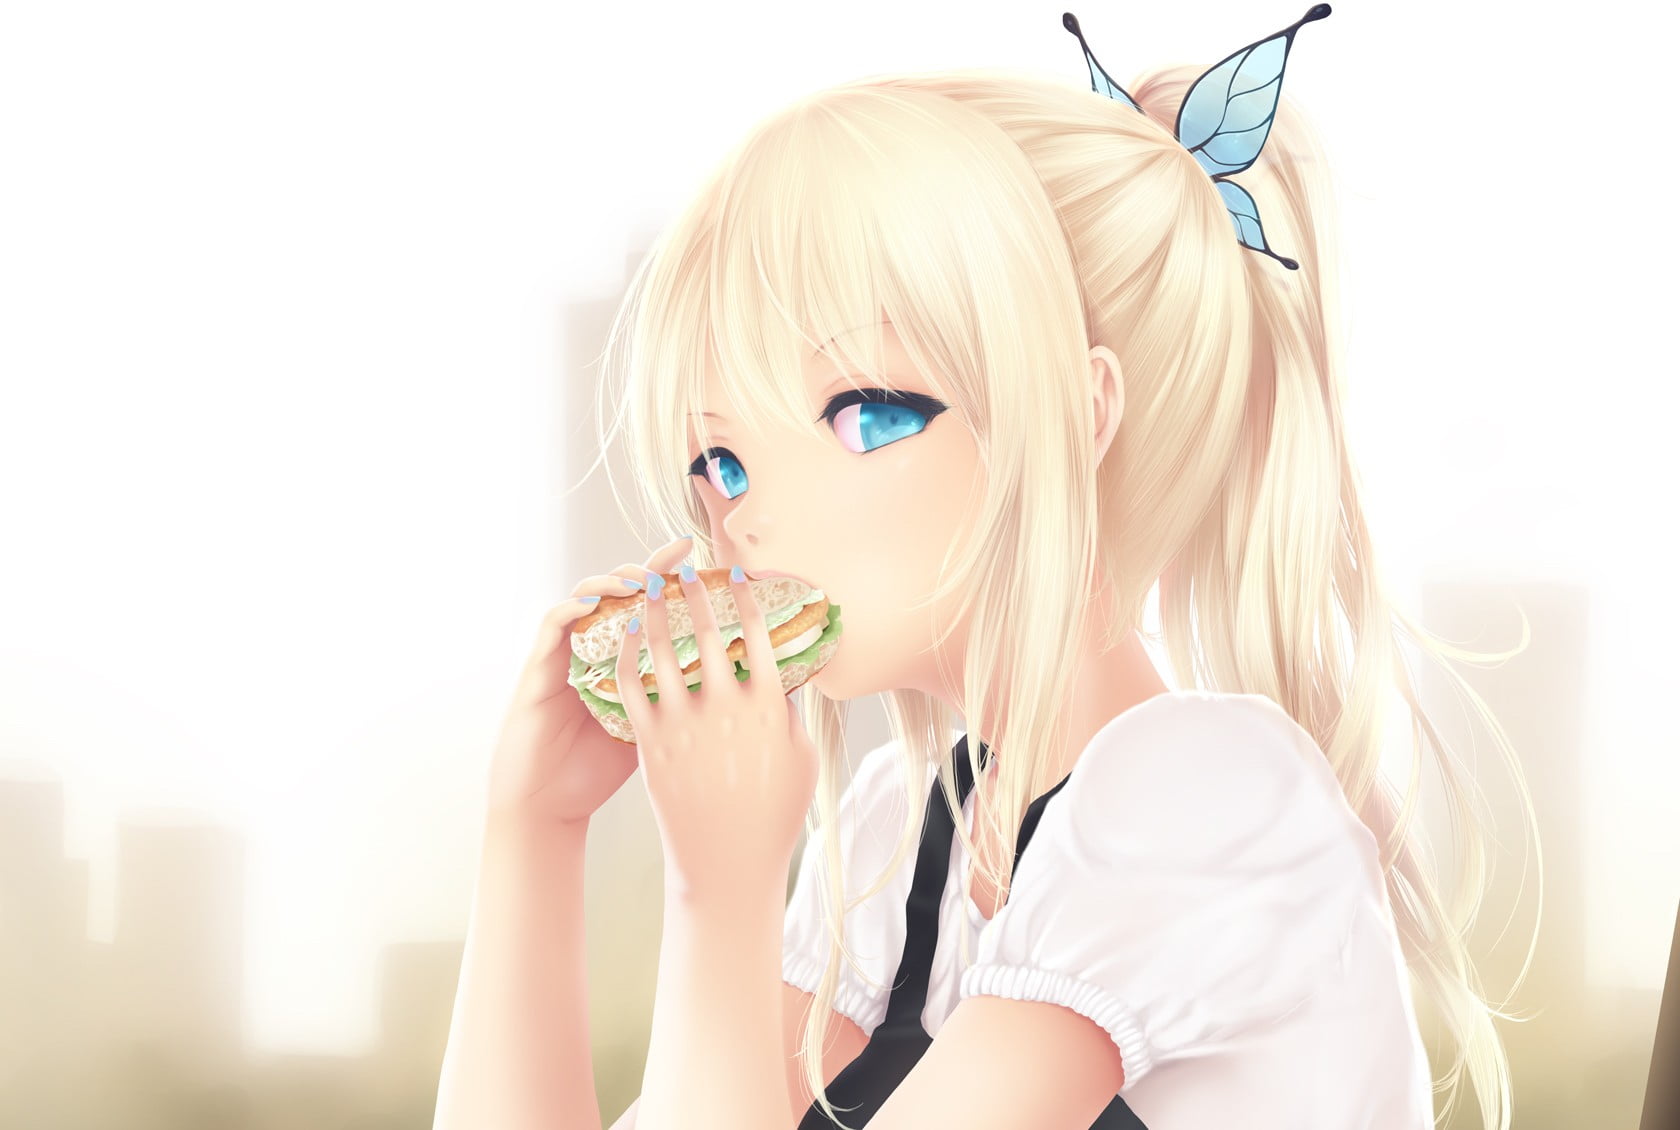 Anime Sticker with Blonde Hair - wide 4